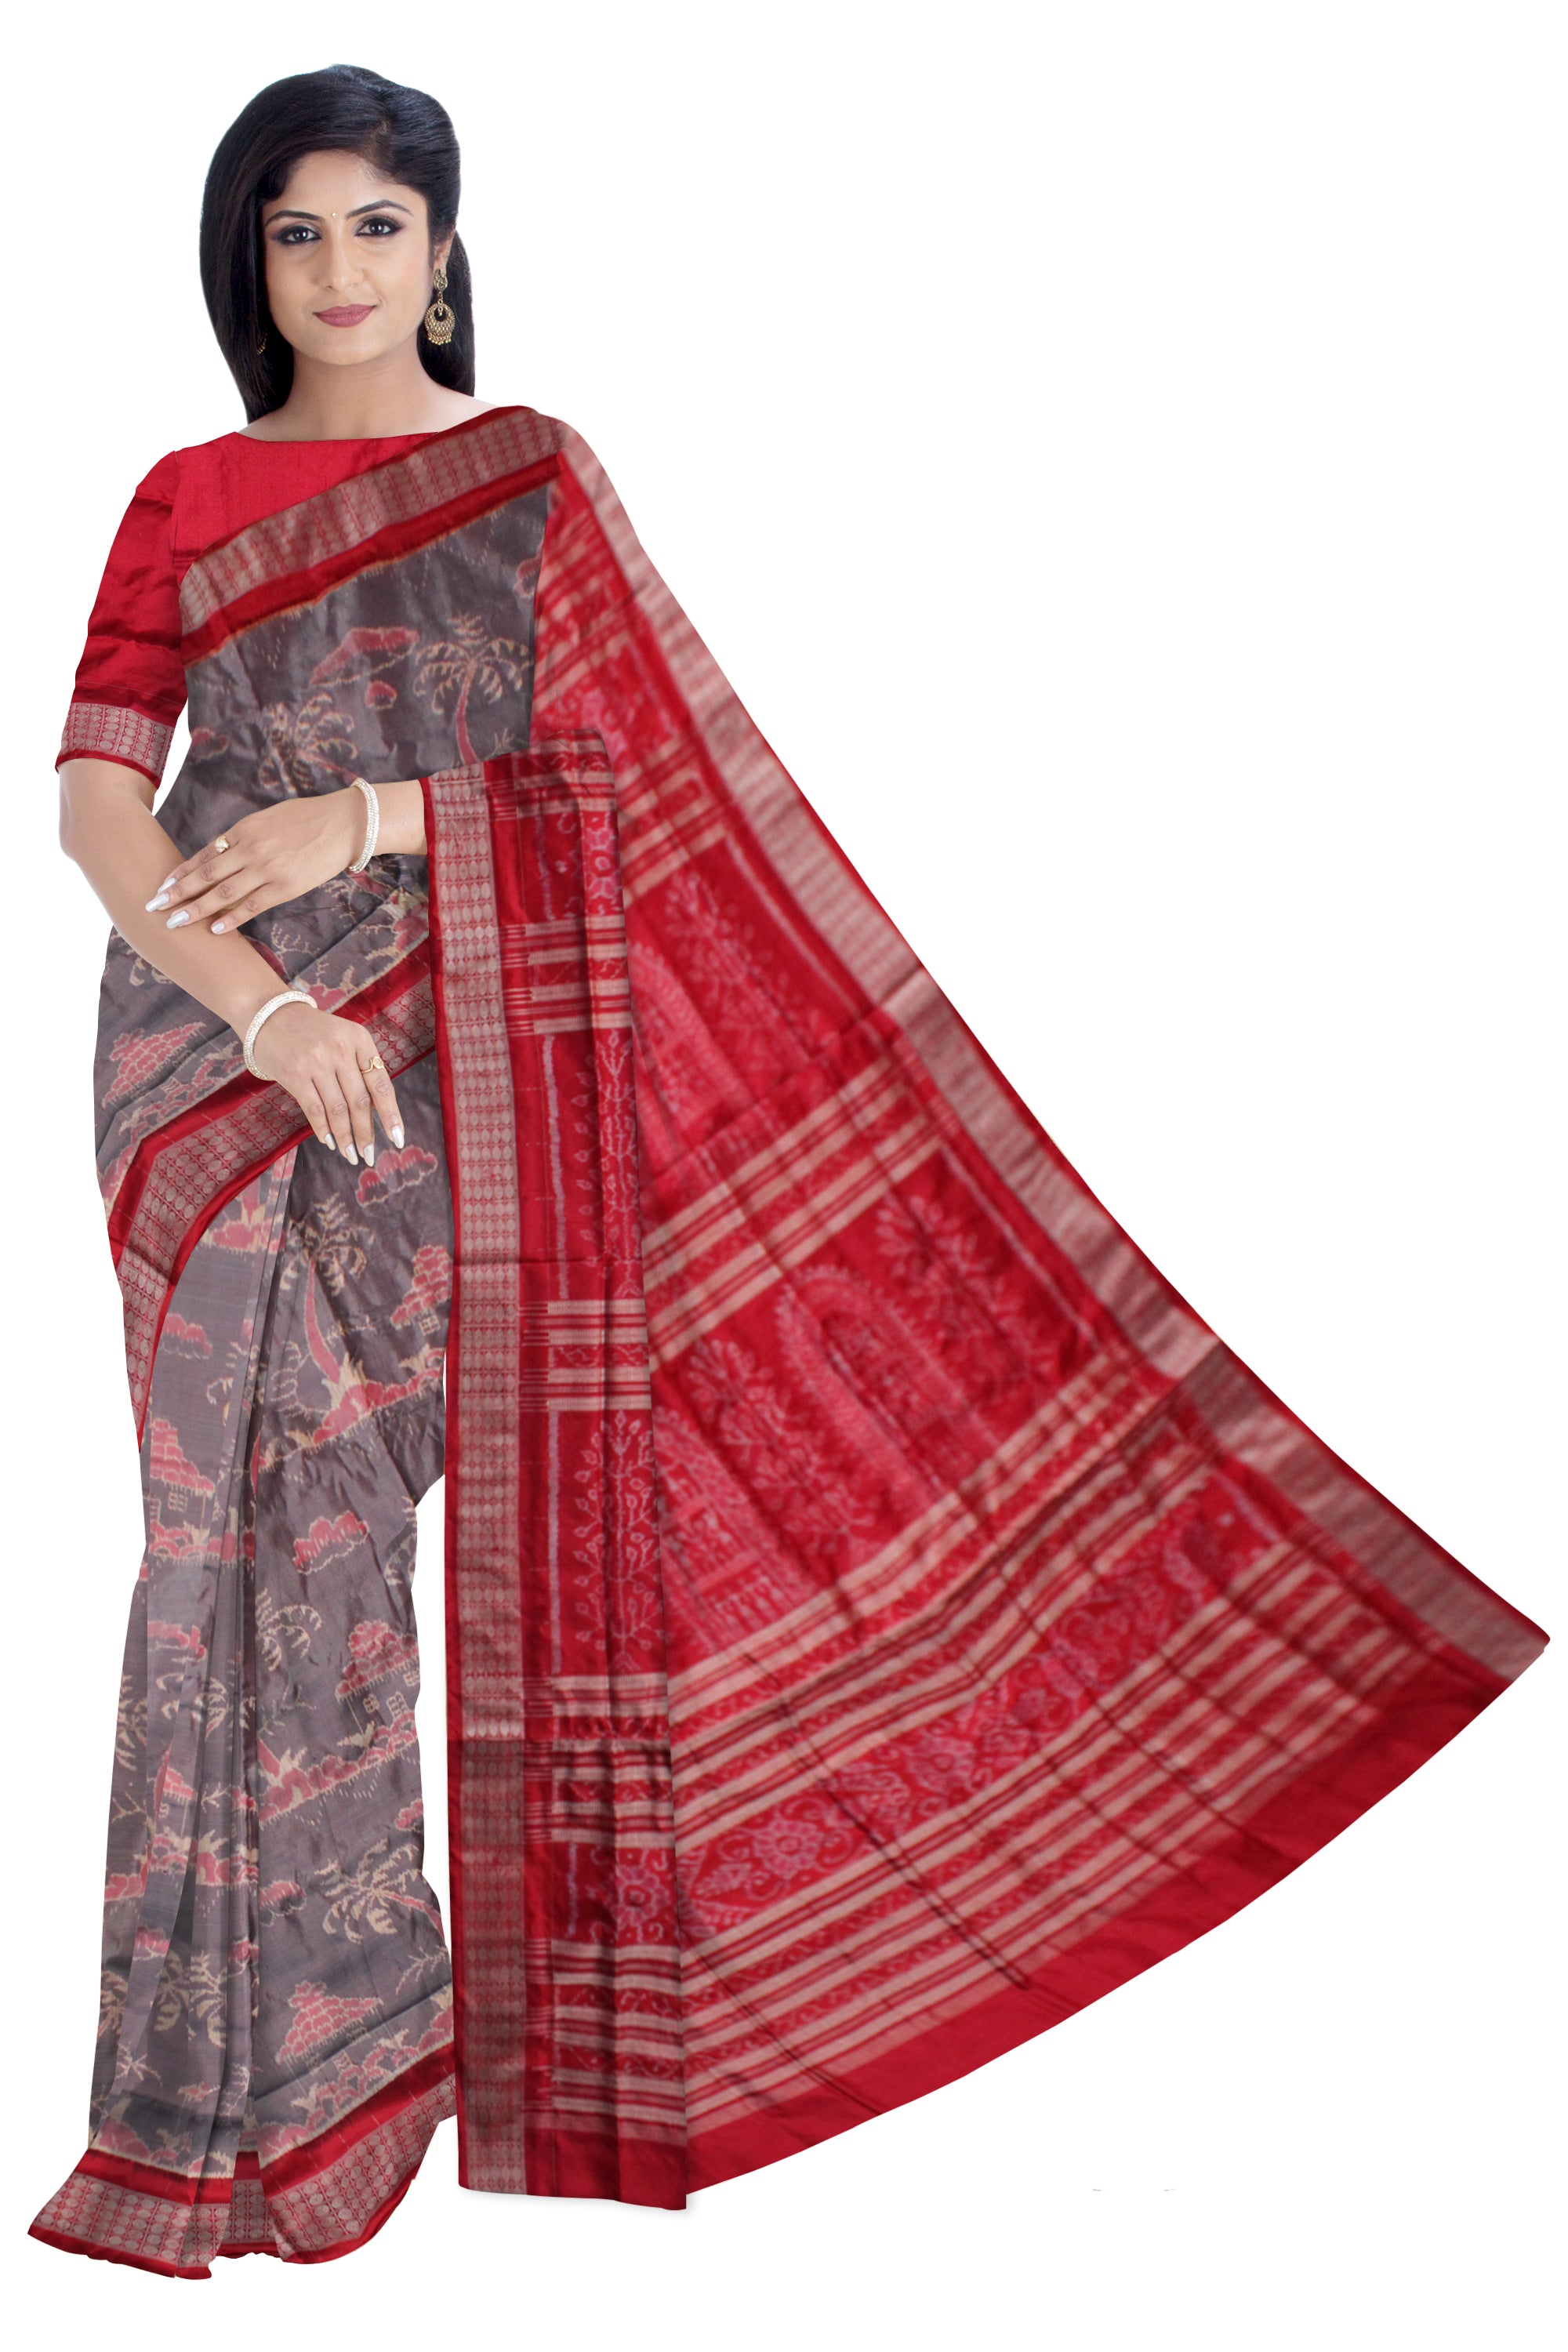 SMALL HOUSE AND TREE PATTERN PURE SILK SAREE IS GREY AND RED COLOR BASE,AVAILABLE WITH MATCHING BLOUSE PIECE. - Koshali Arts & Crafts Enterprise